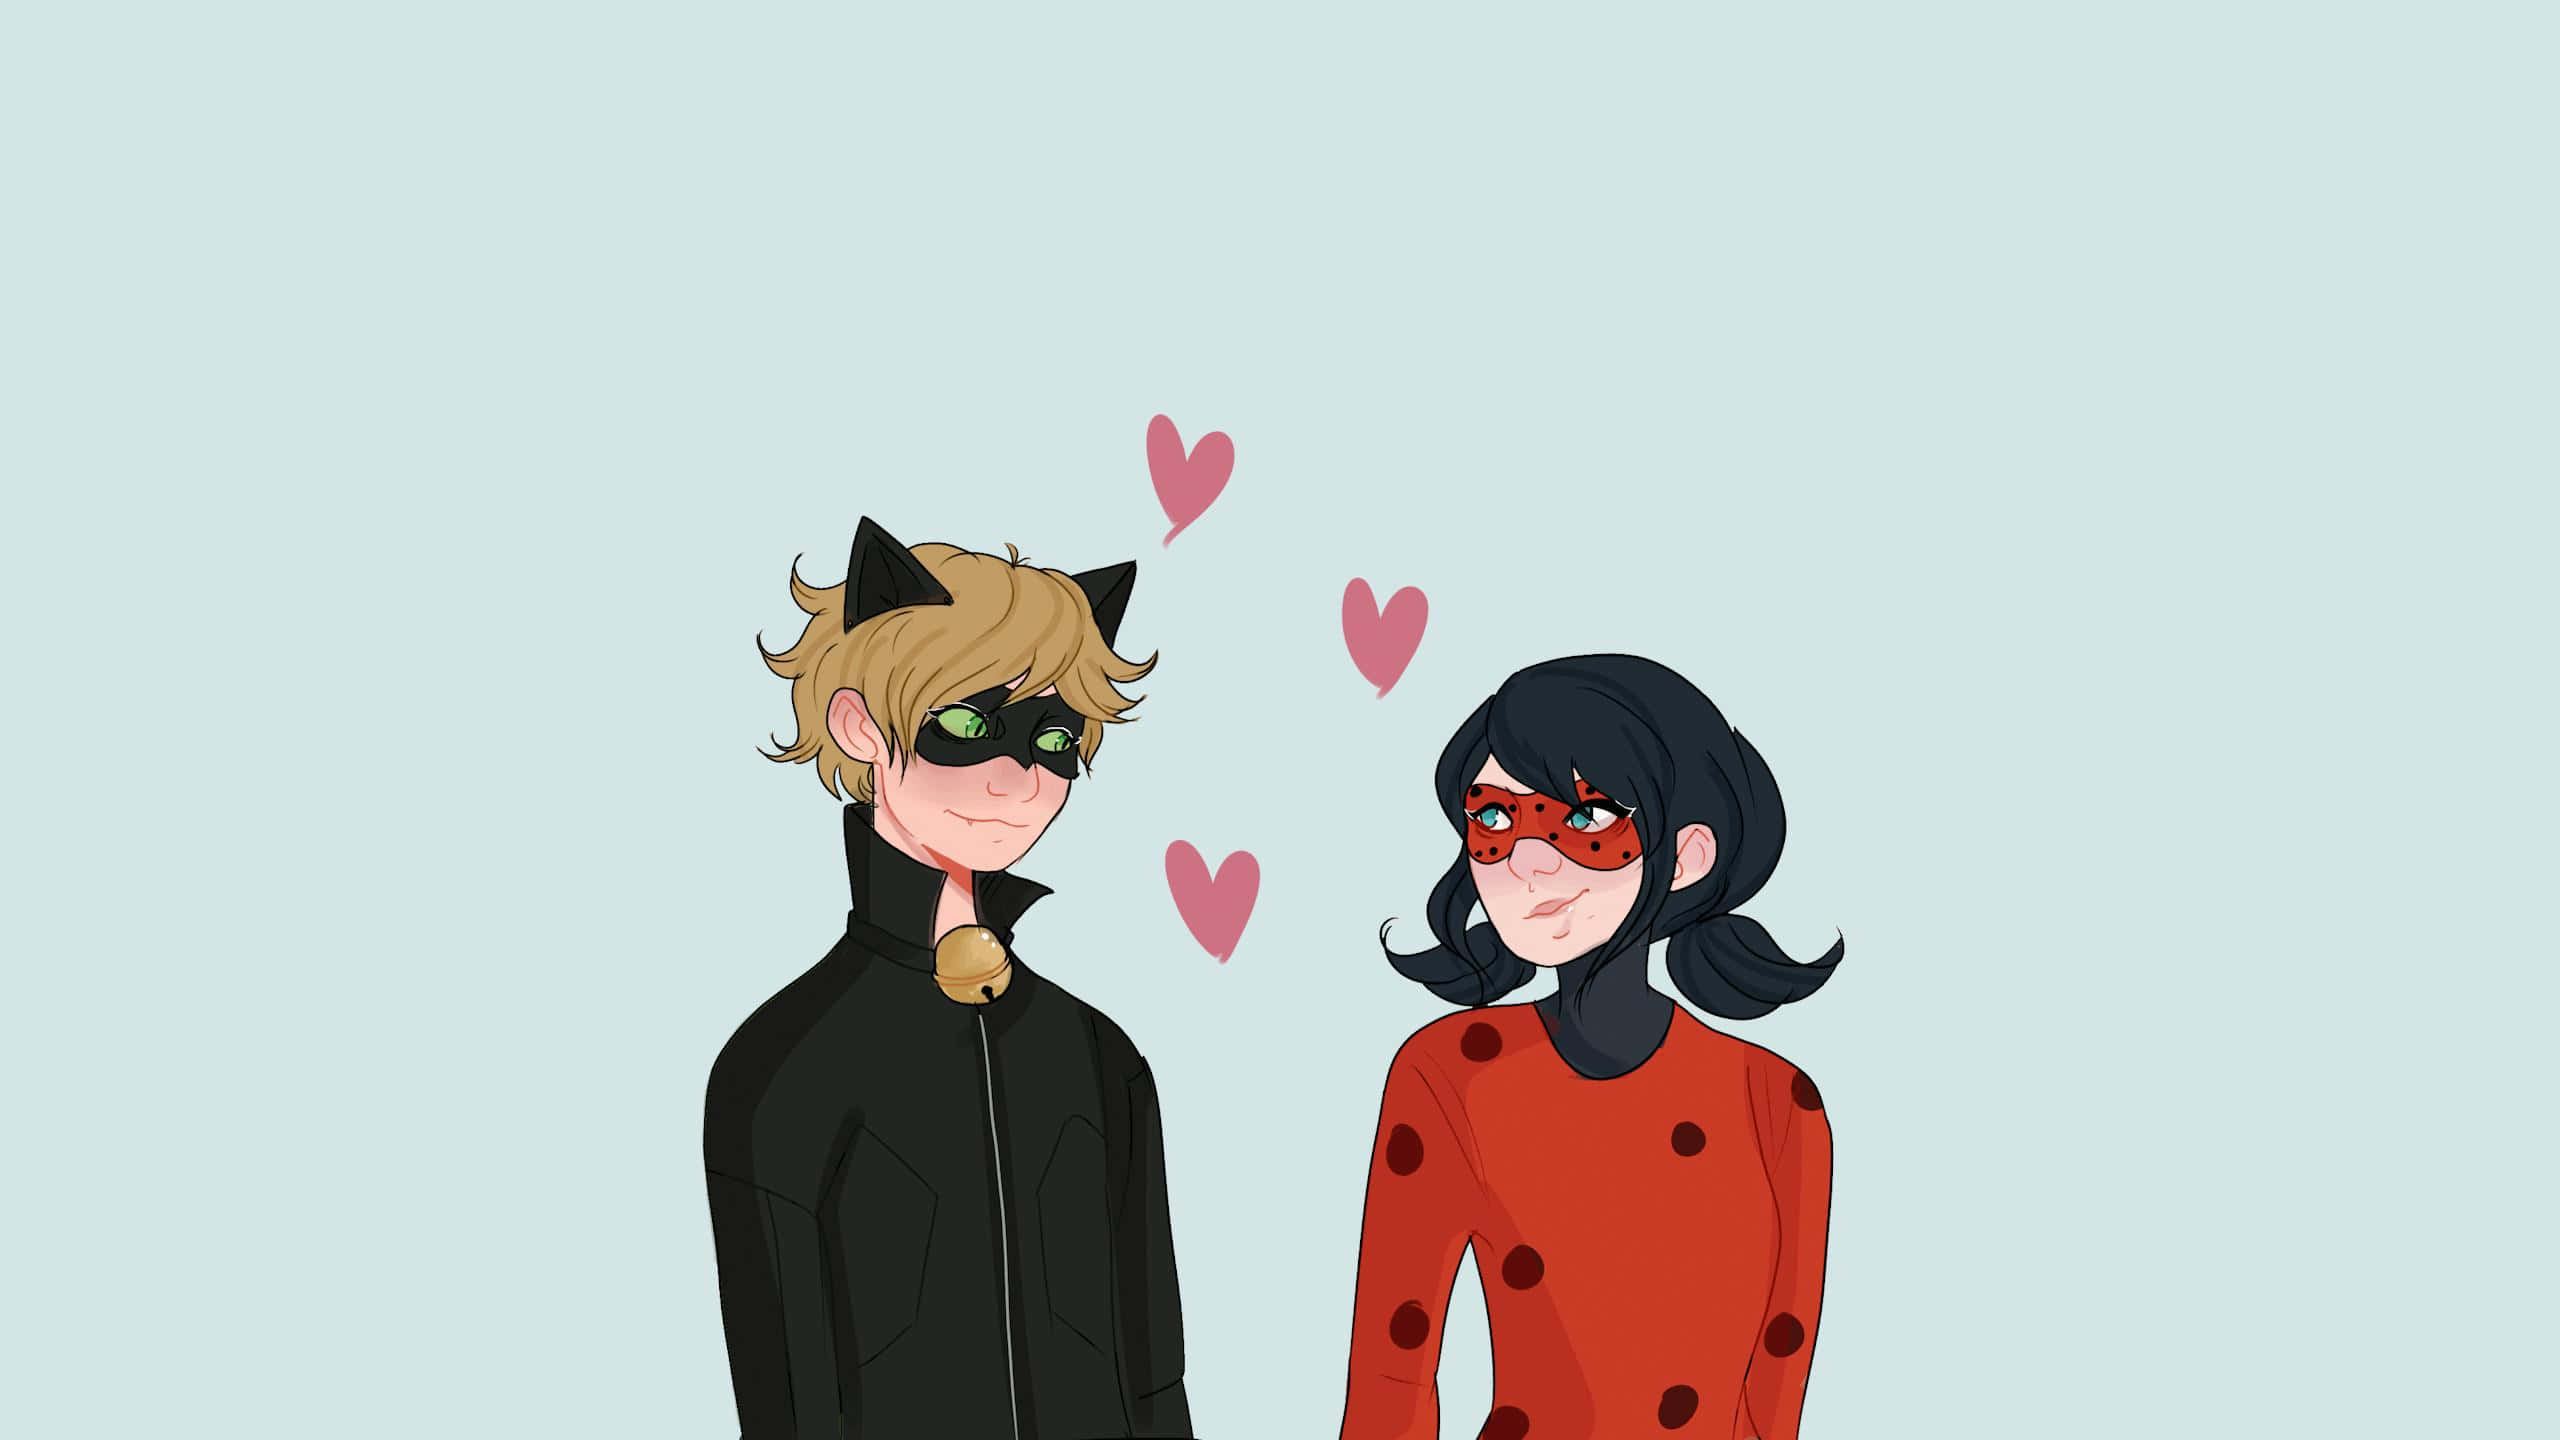 Ladybug and Cat Noir are ready for action